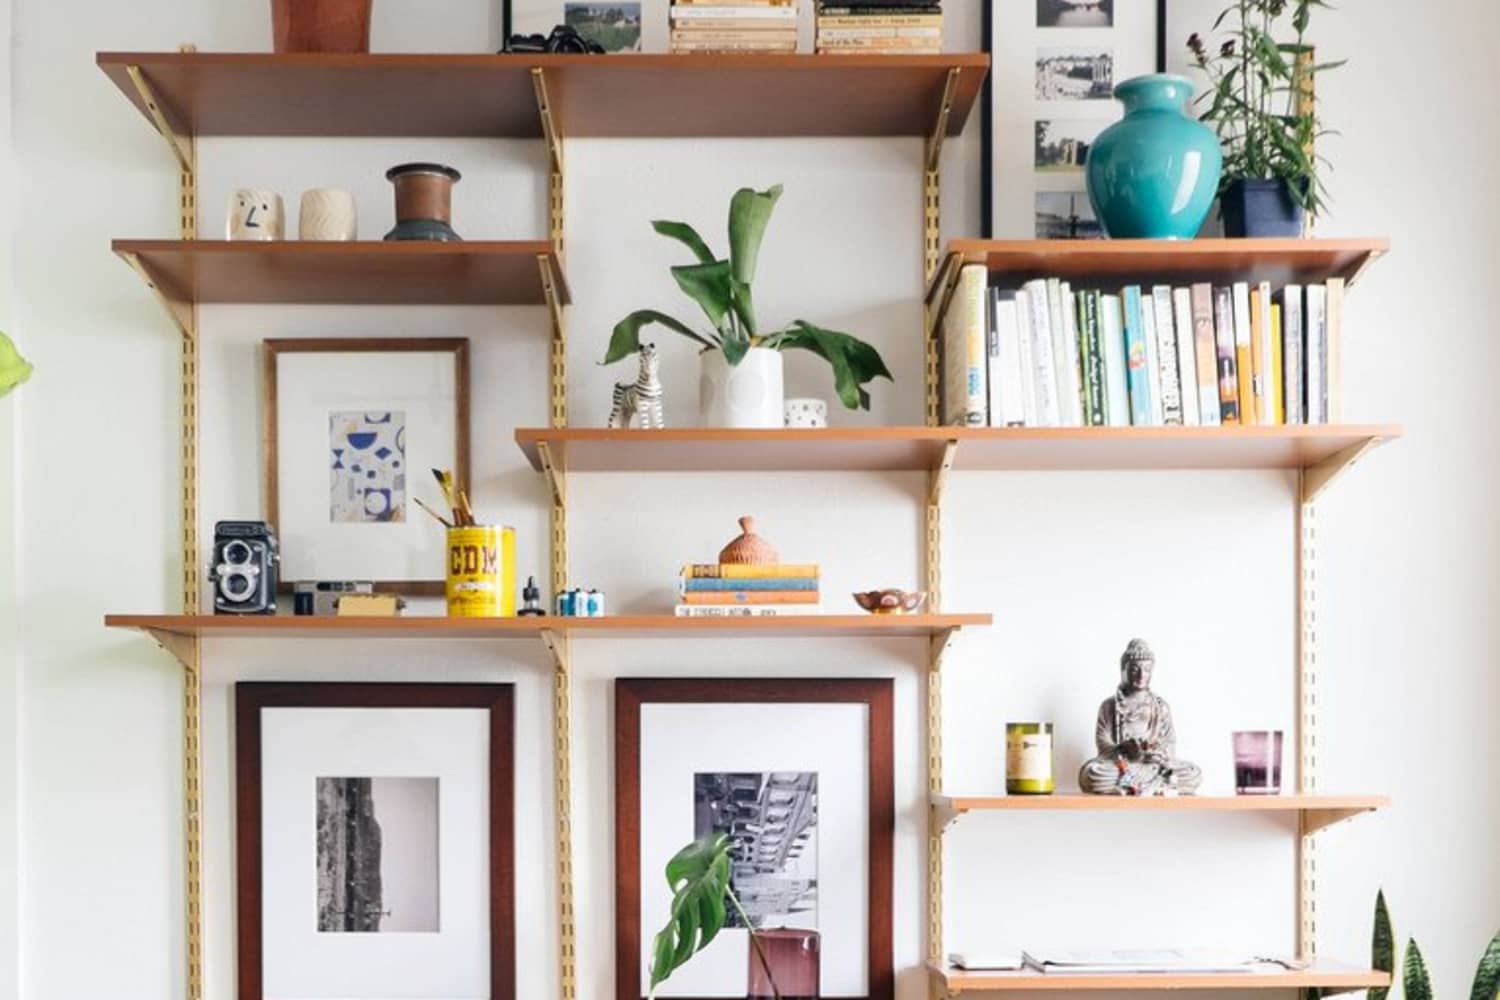 8 Spaces that Make Track Shelving Look Good